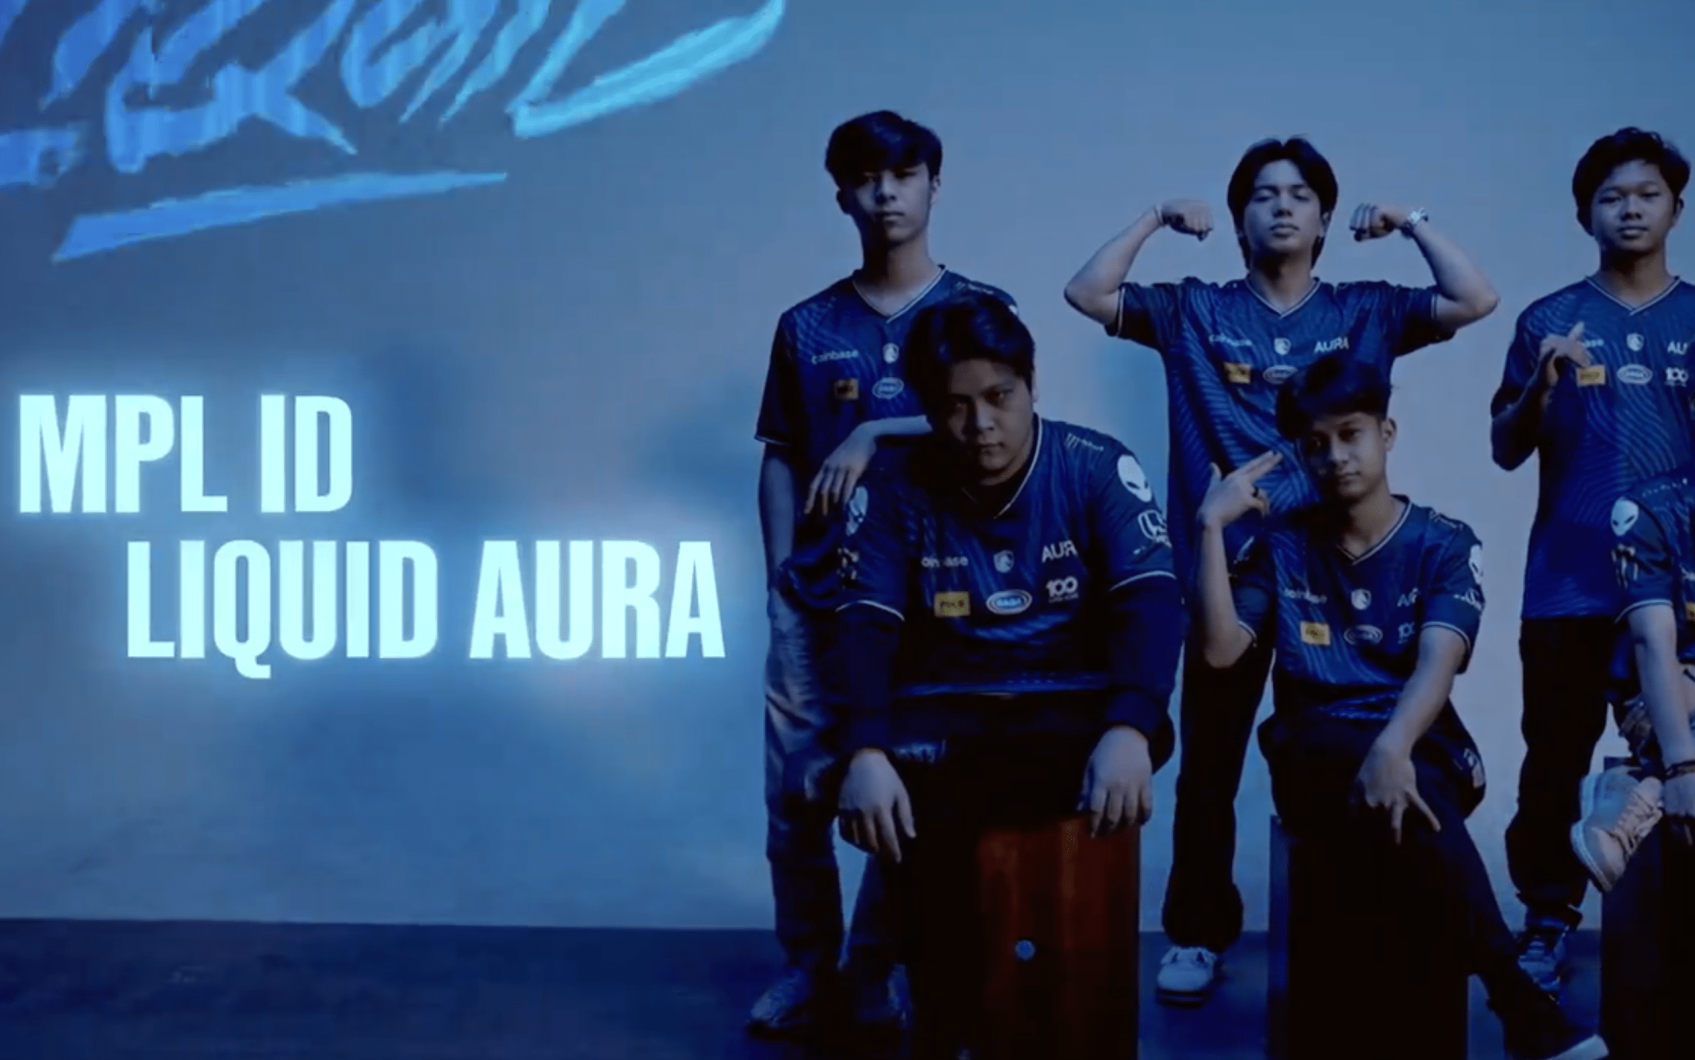 Team Liquid enters Mobile Legends Bang Bang by purchasing ECHO and AURA